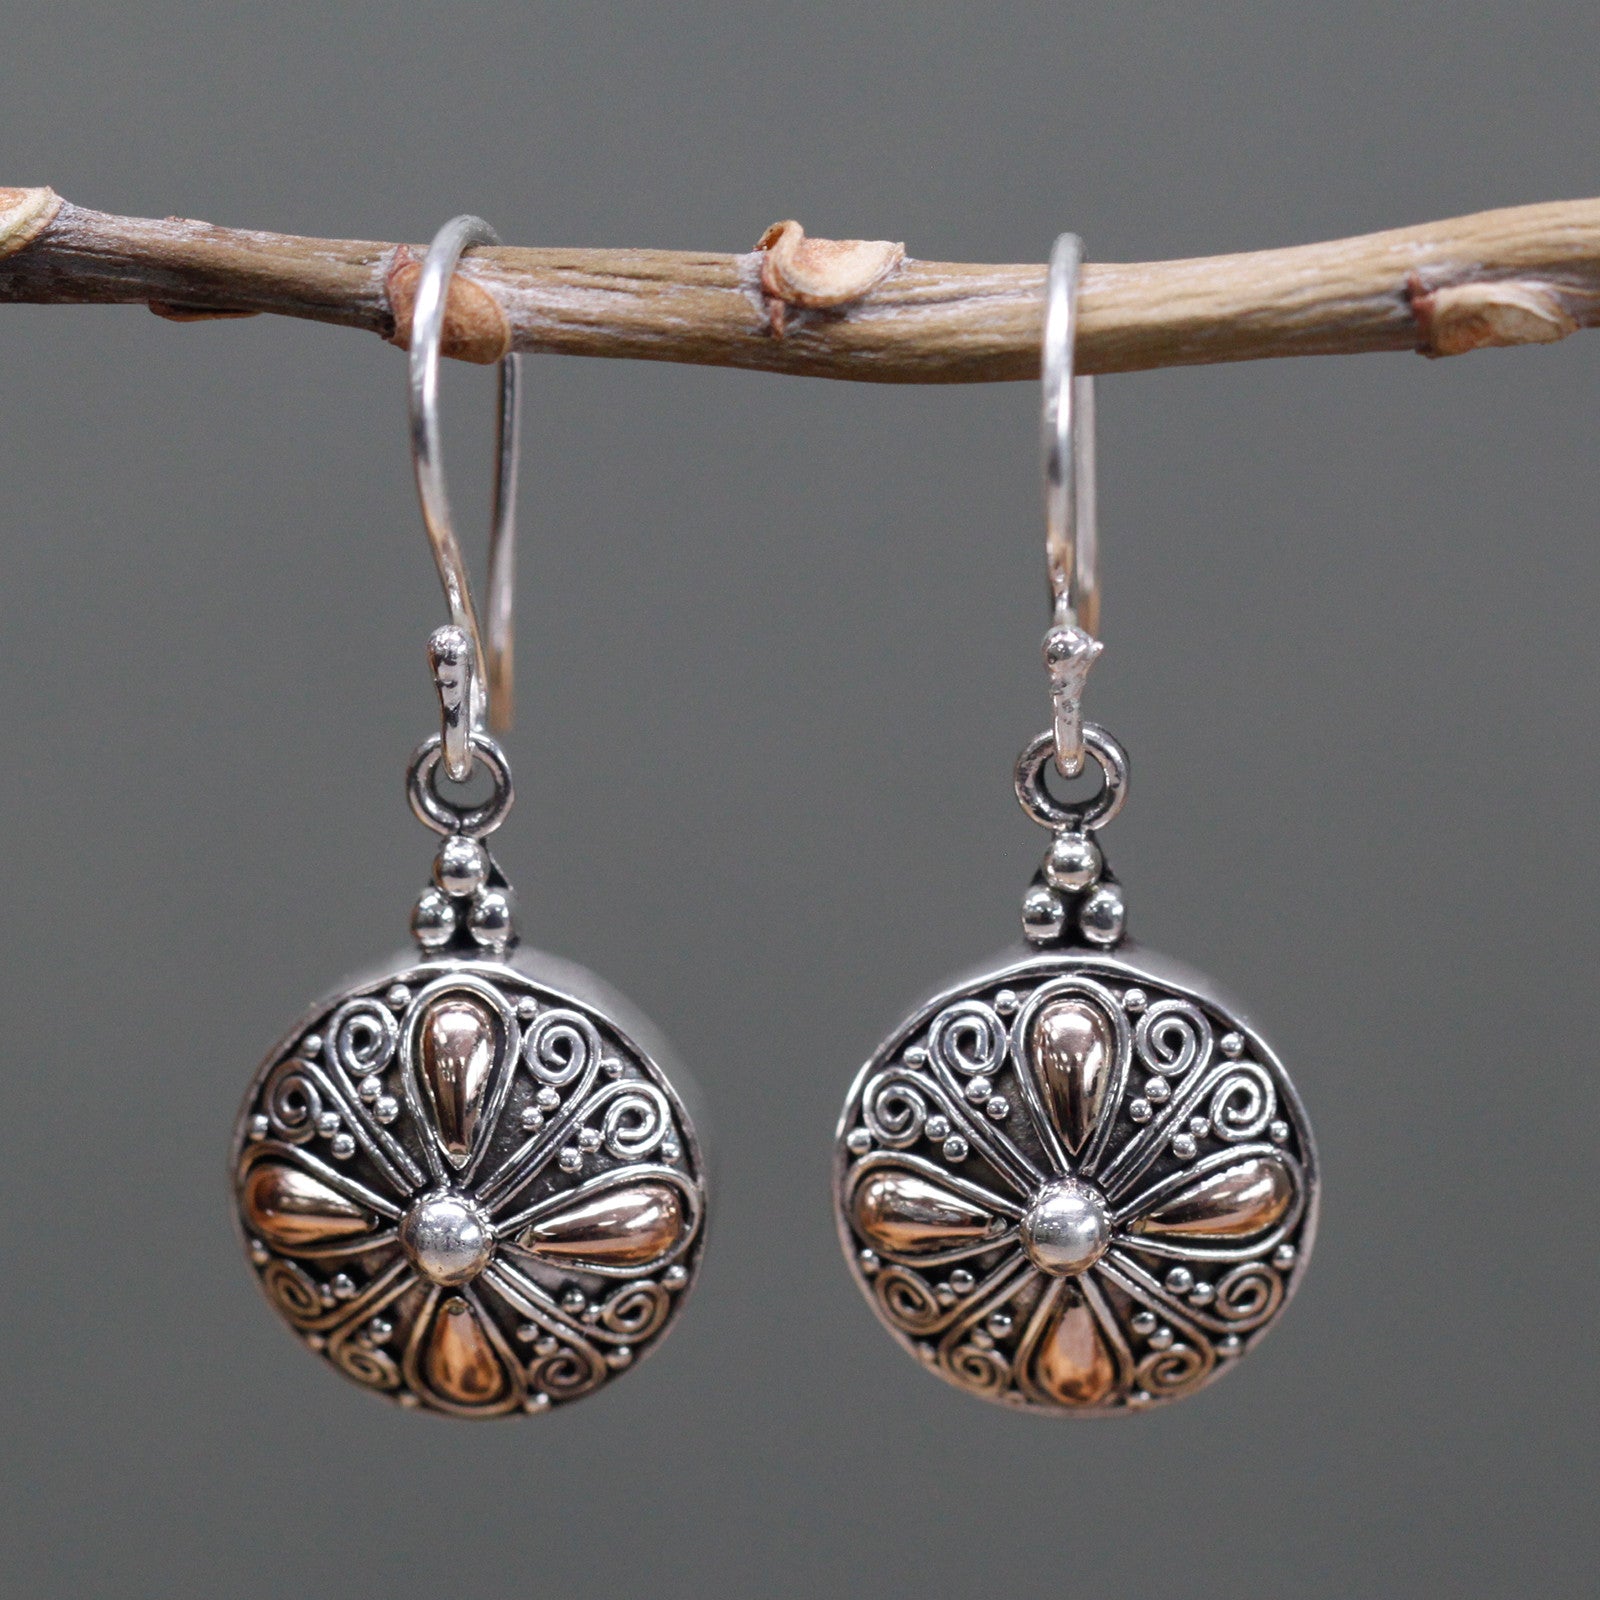 Silver & Gold Earrings - Classic Round - Cosmic Serenity Shop